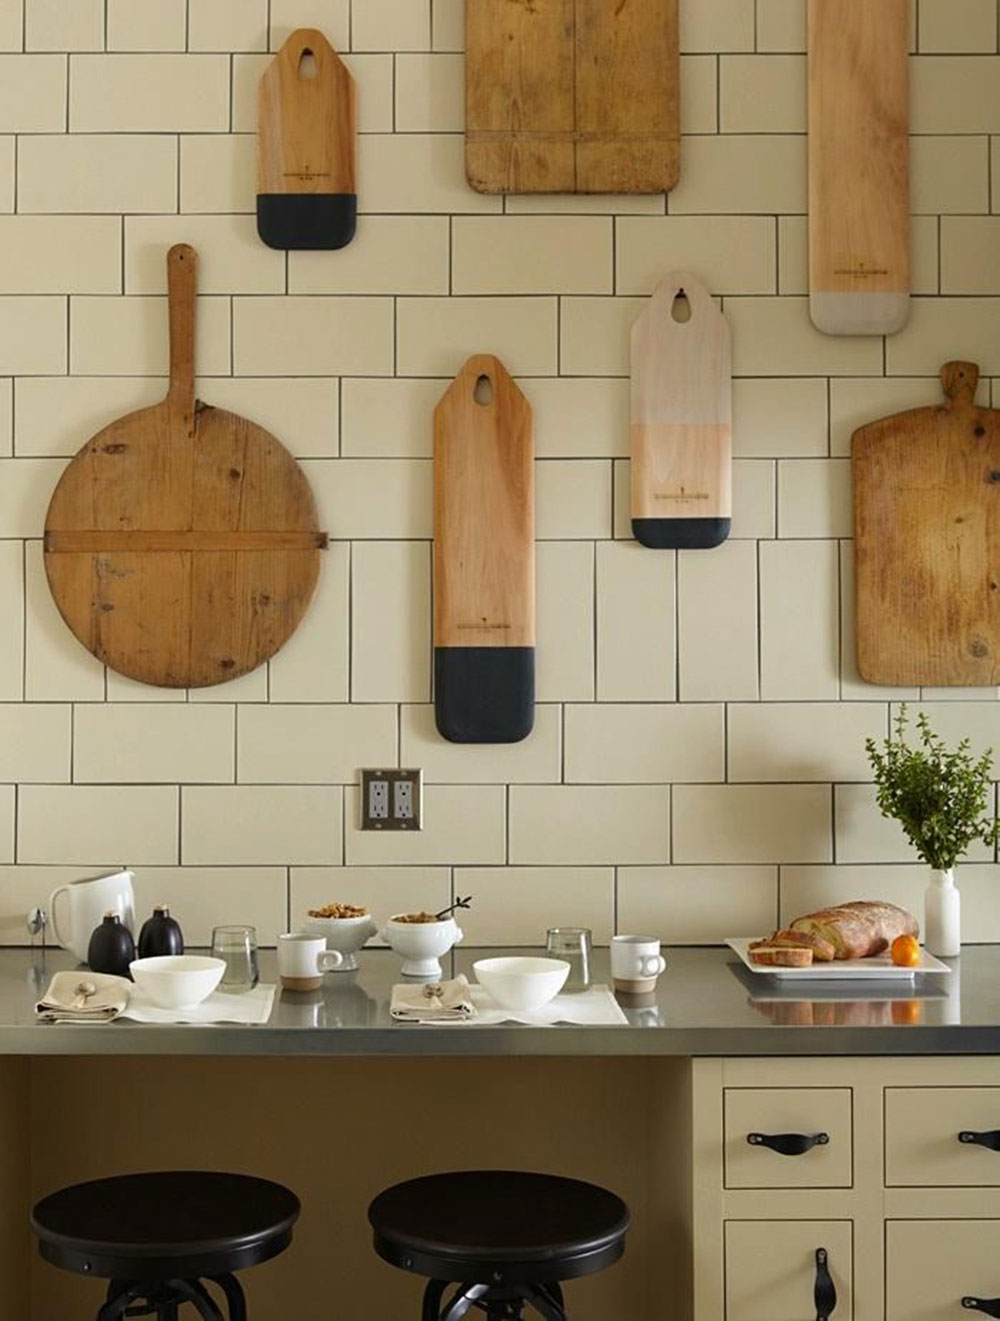 There-Are-So-Many-Ways-to-Use-Cutting-Boards-as-Decor3 How to Display Cutting Boards on a Kitchen Counter